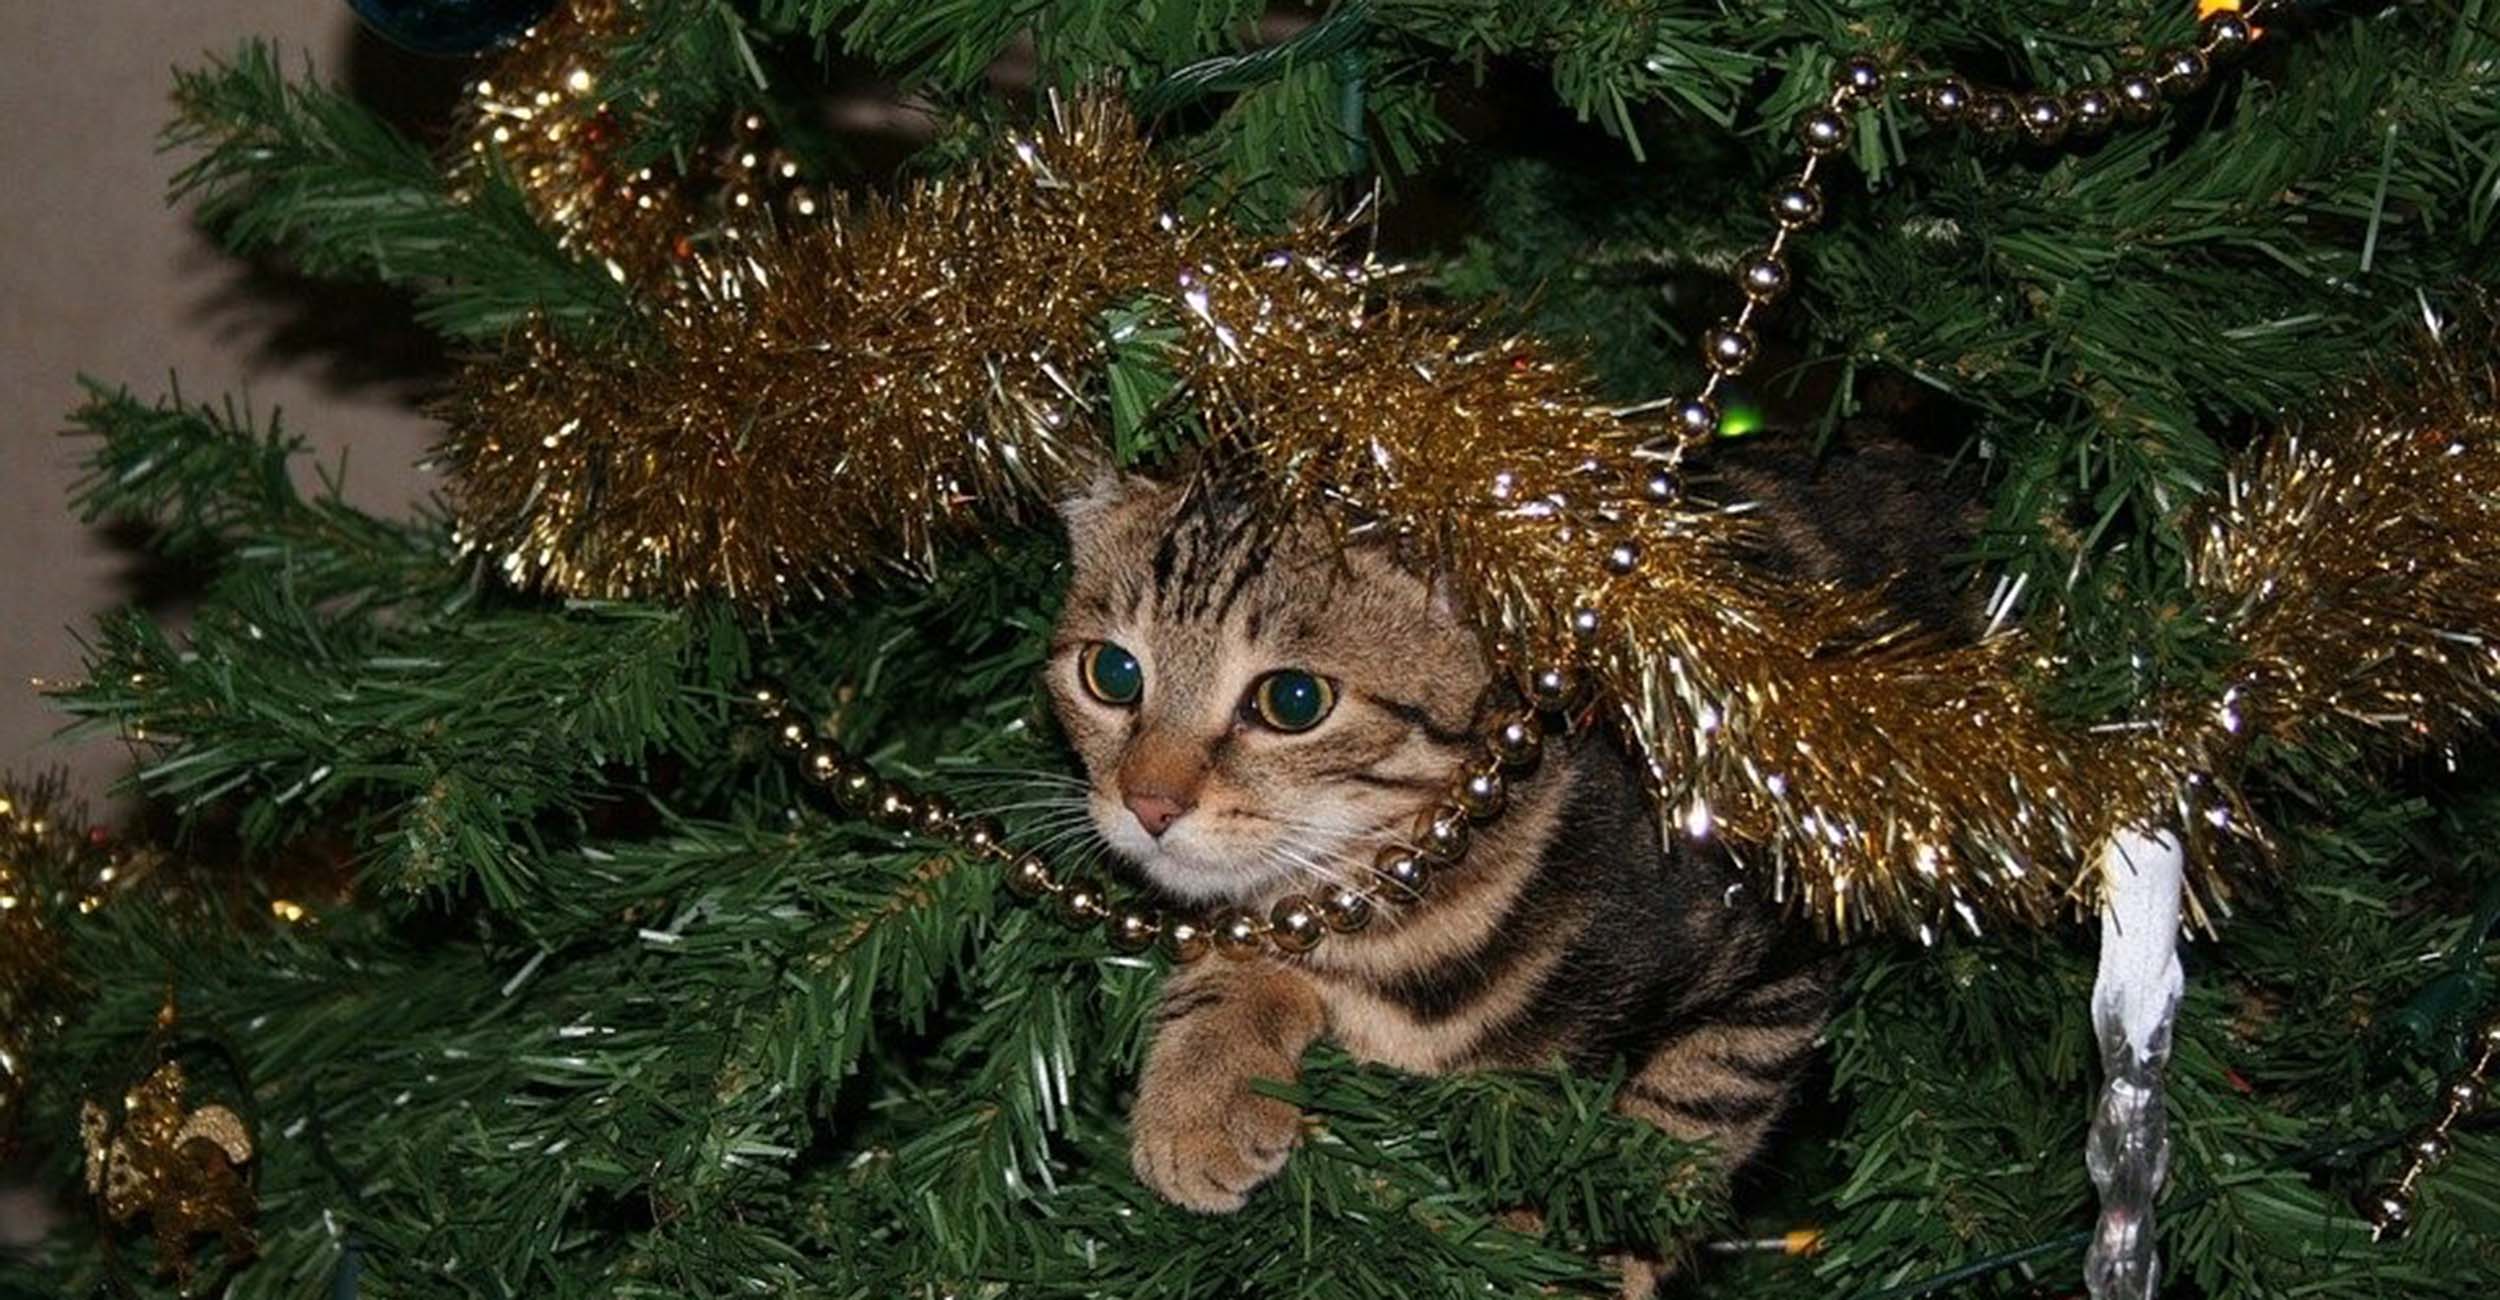 A cat in a Christmas tree.